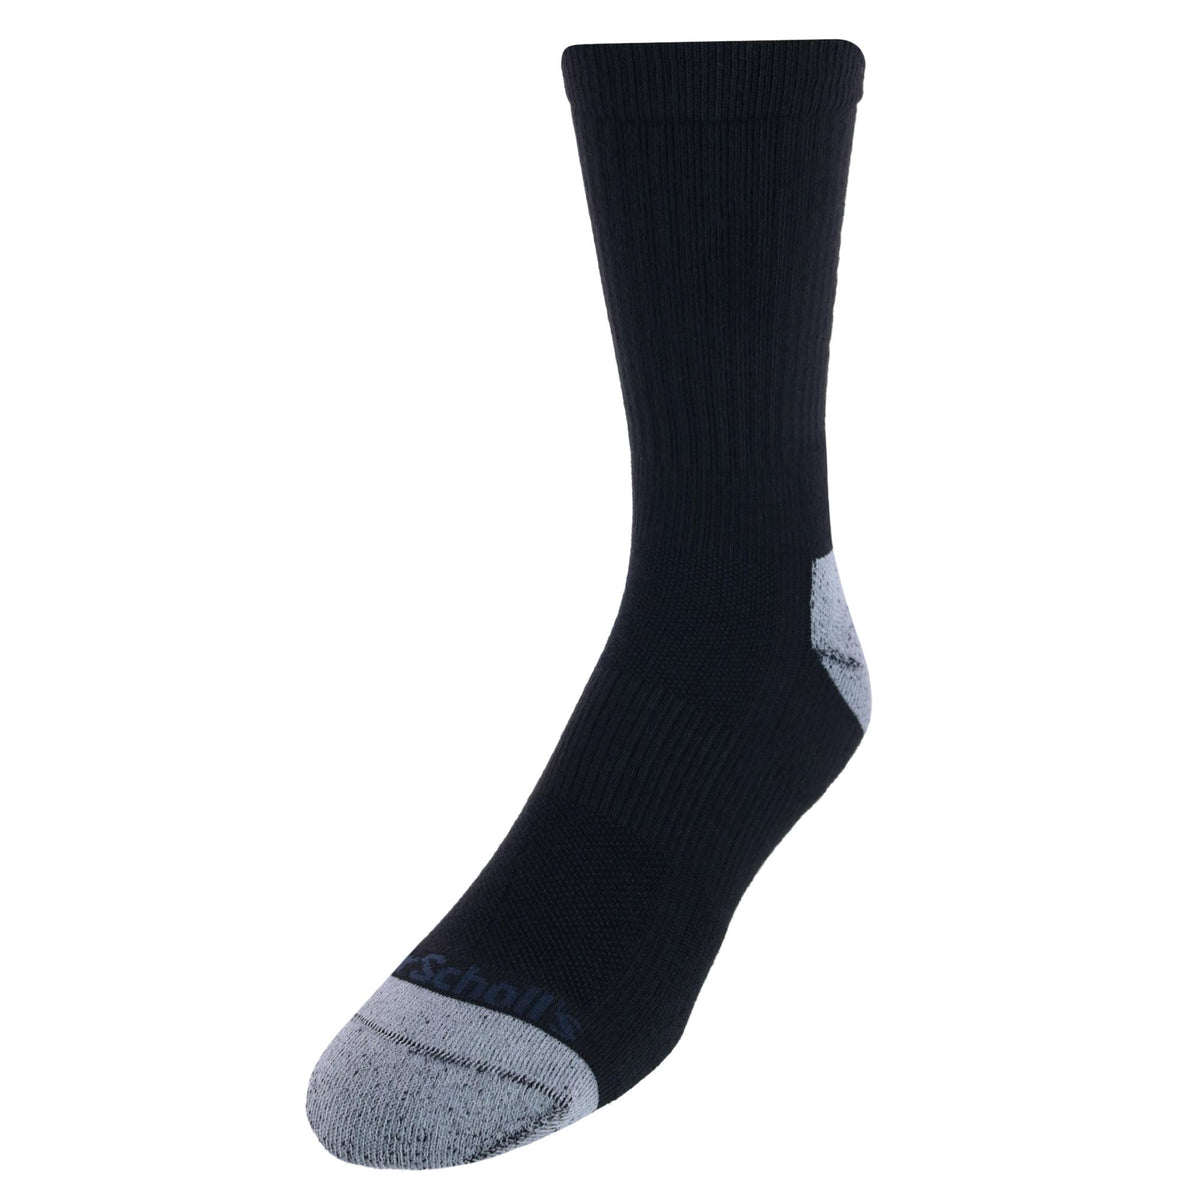 Men's Crew Compression Work Socks (2 Pair Pack) by Dr. Scholl's ...